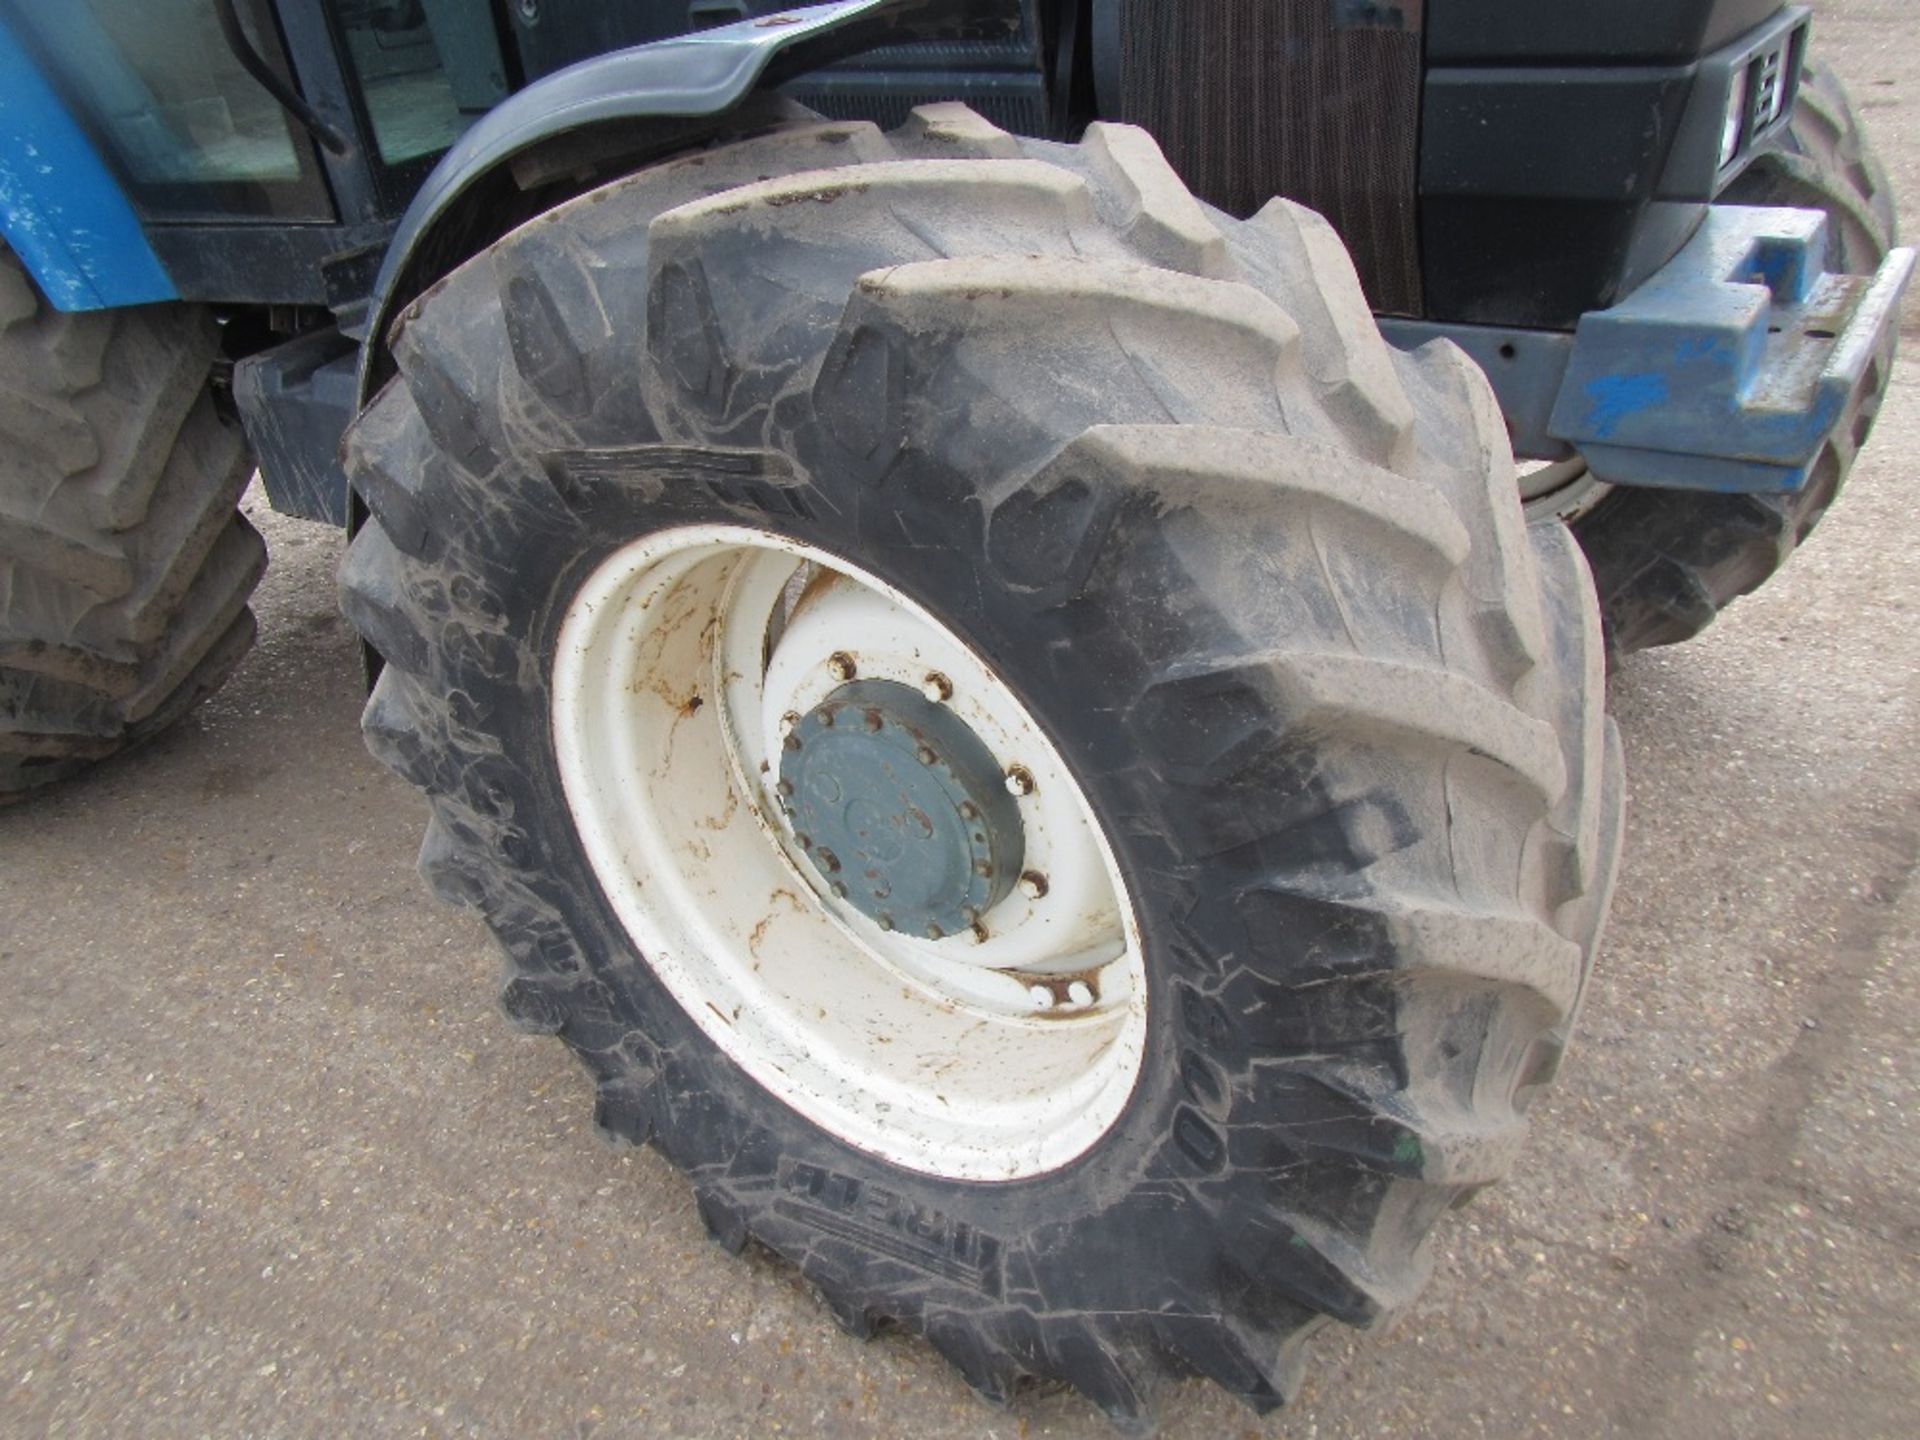 New Holland 8340 SLE 4wd Tractor. V5 will be supplied Reg. No. N243 SCN Ser No 025324B - Image 4 of 17